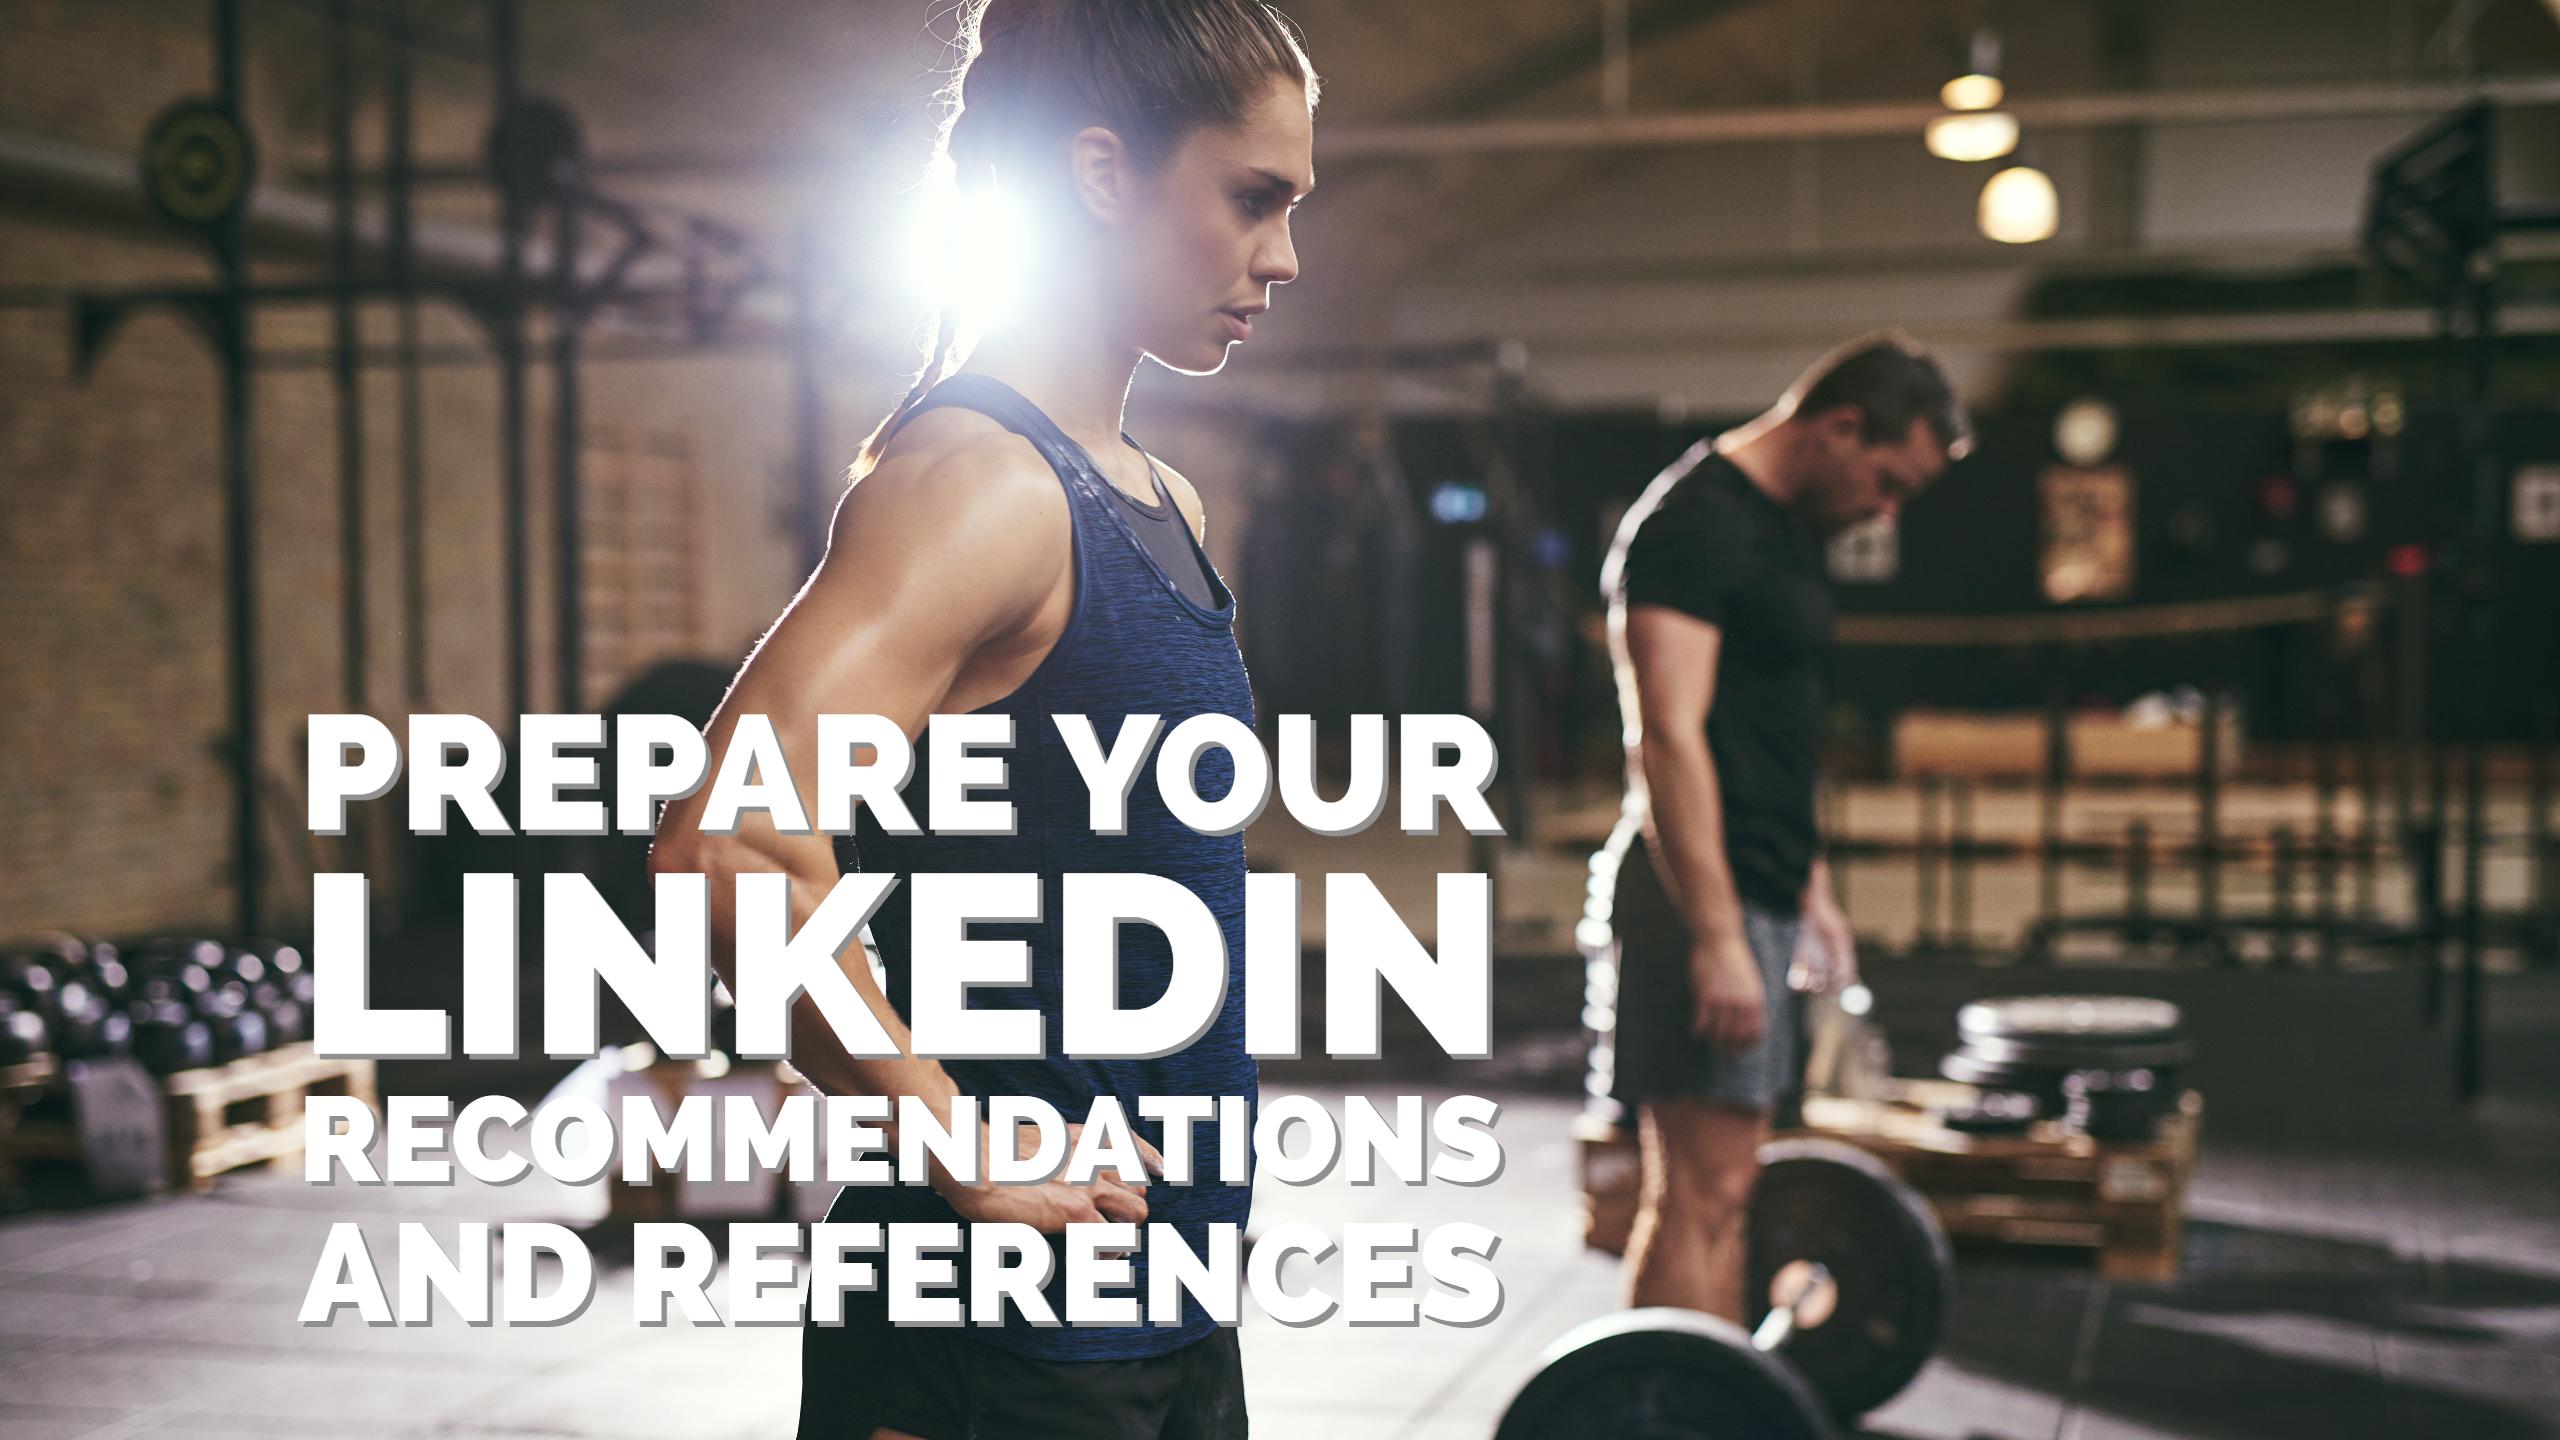 Prepare Your LinkedIn Recommendations and References